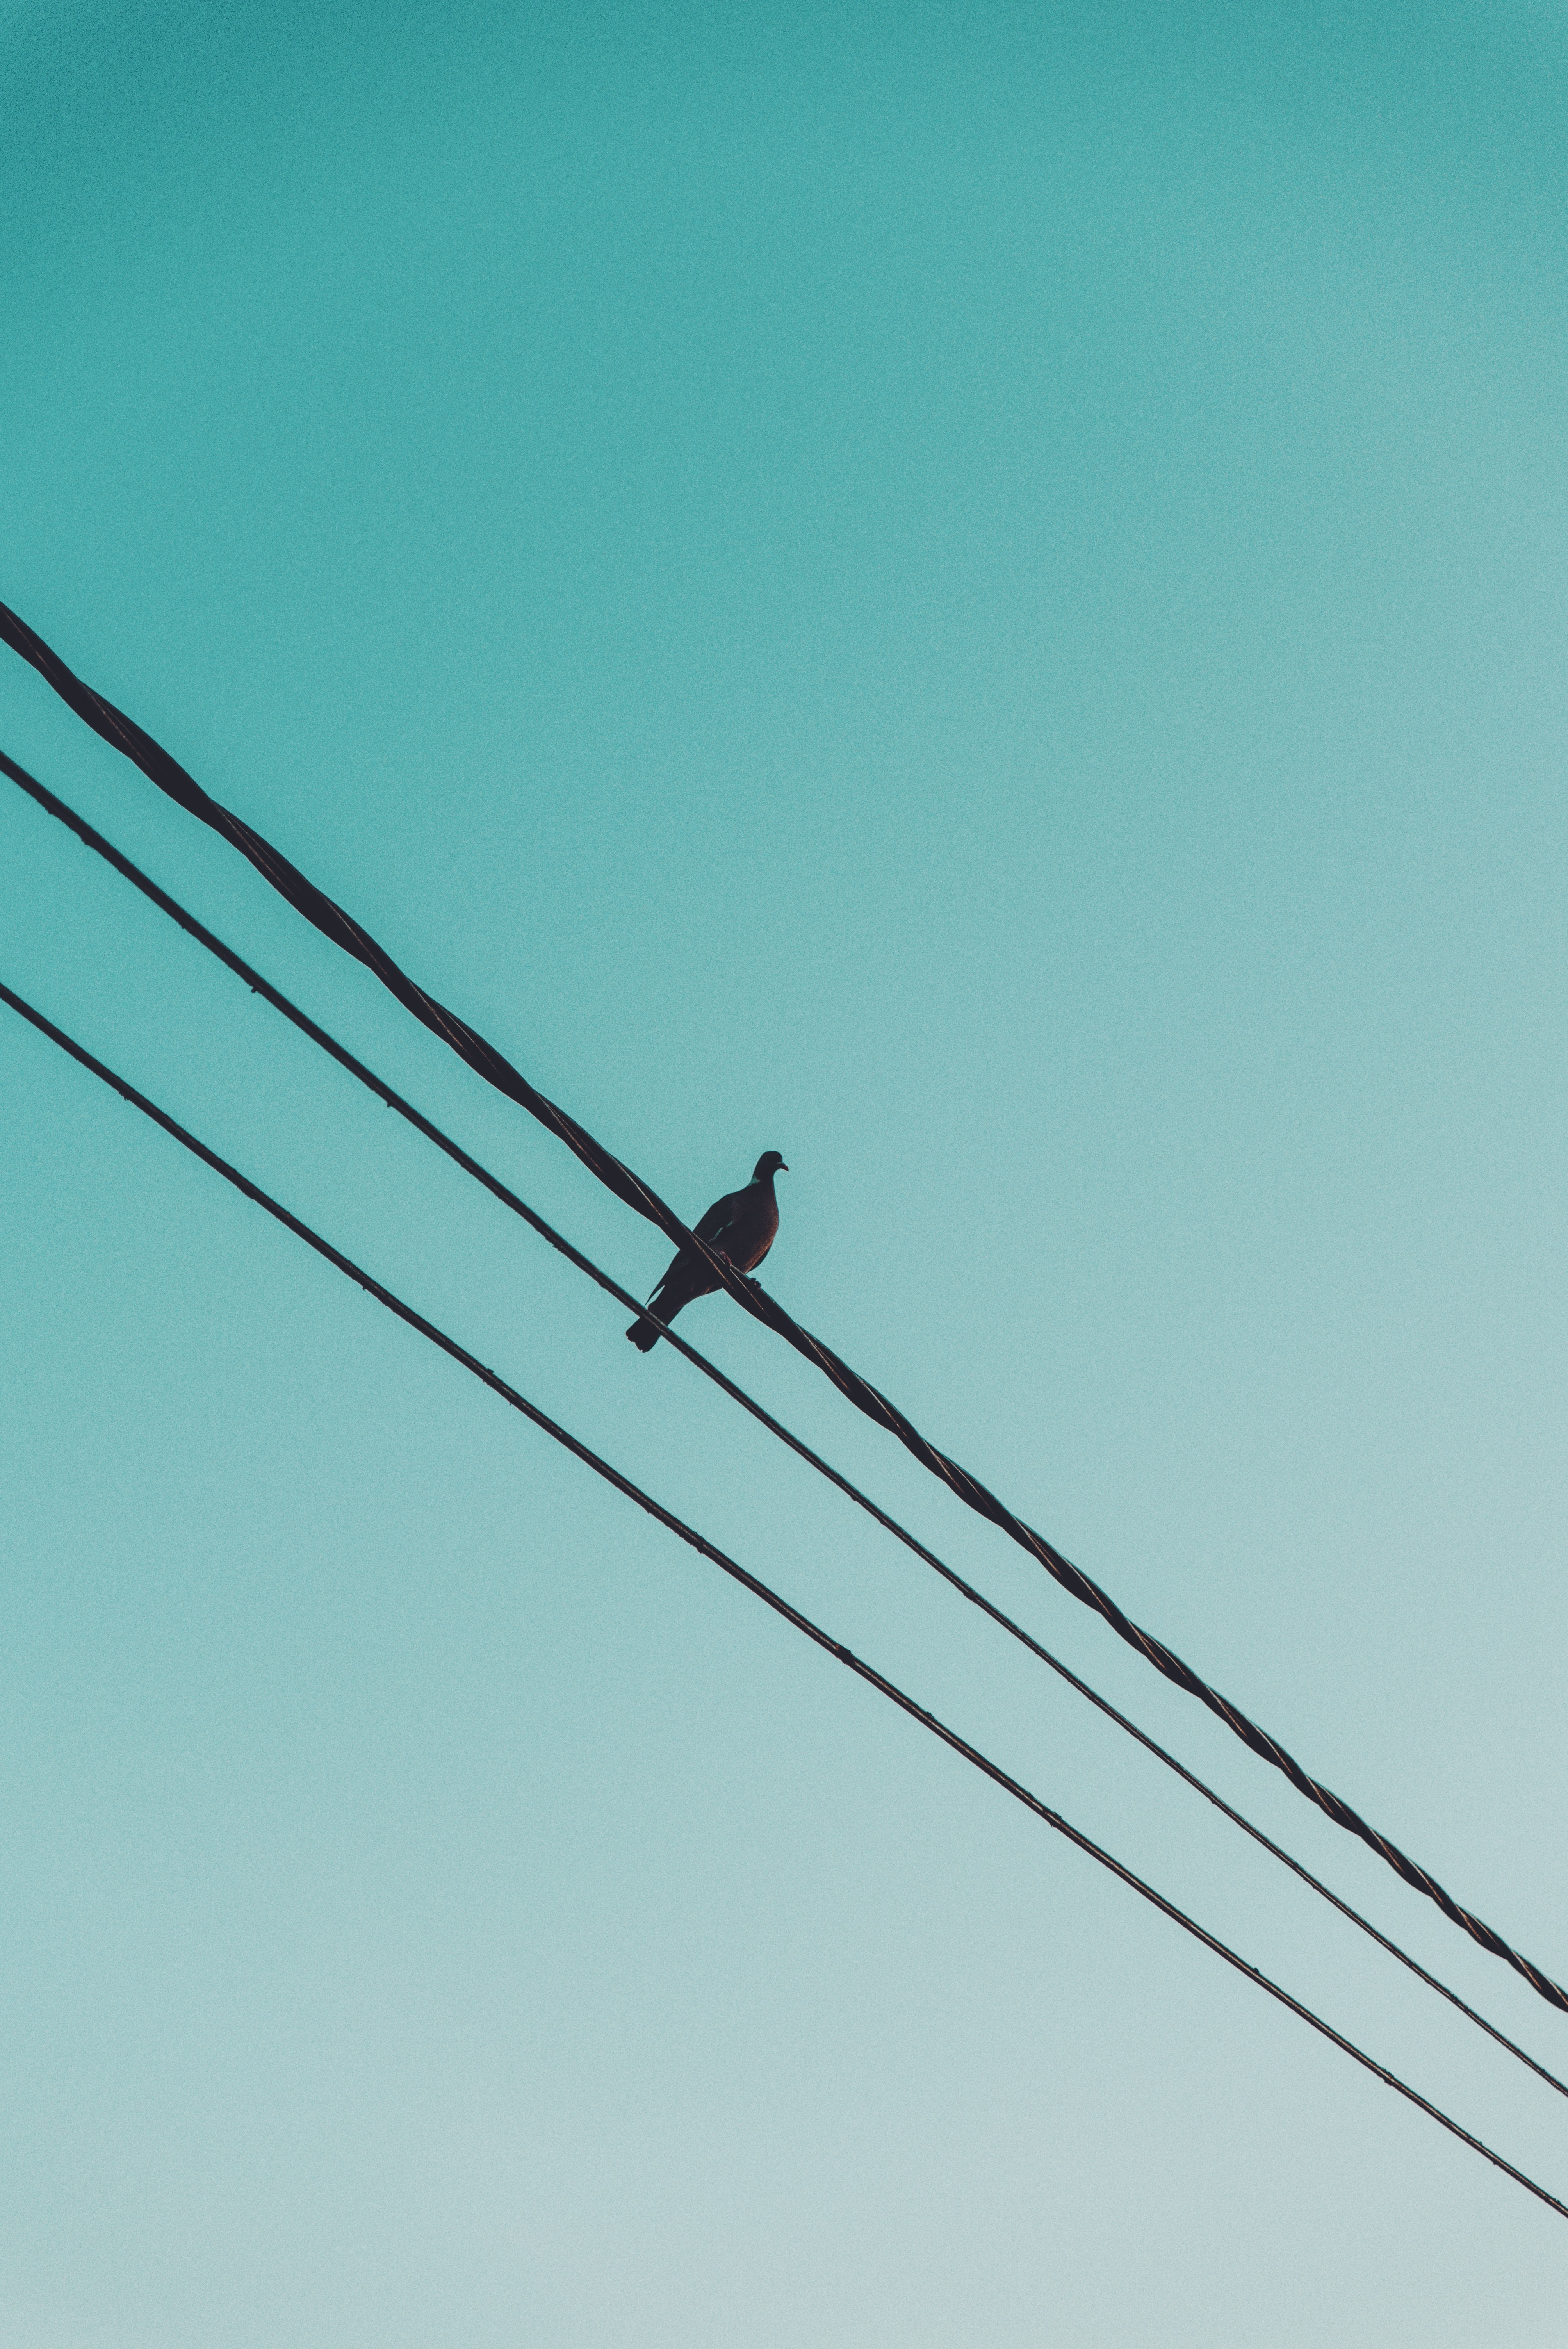 wallpapers wires, dove, animals, sky, wire